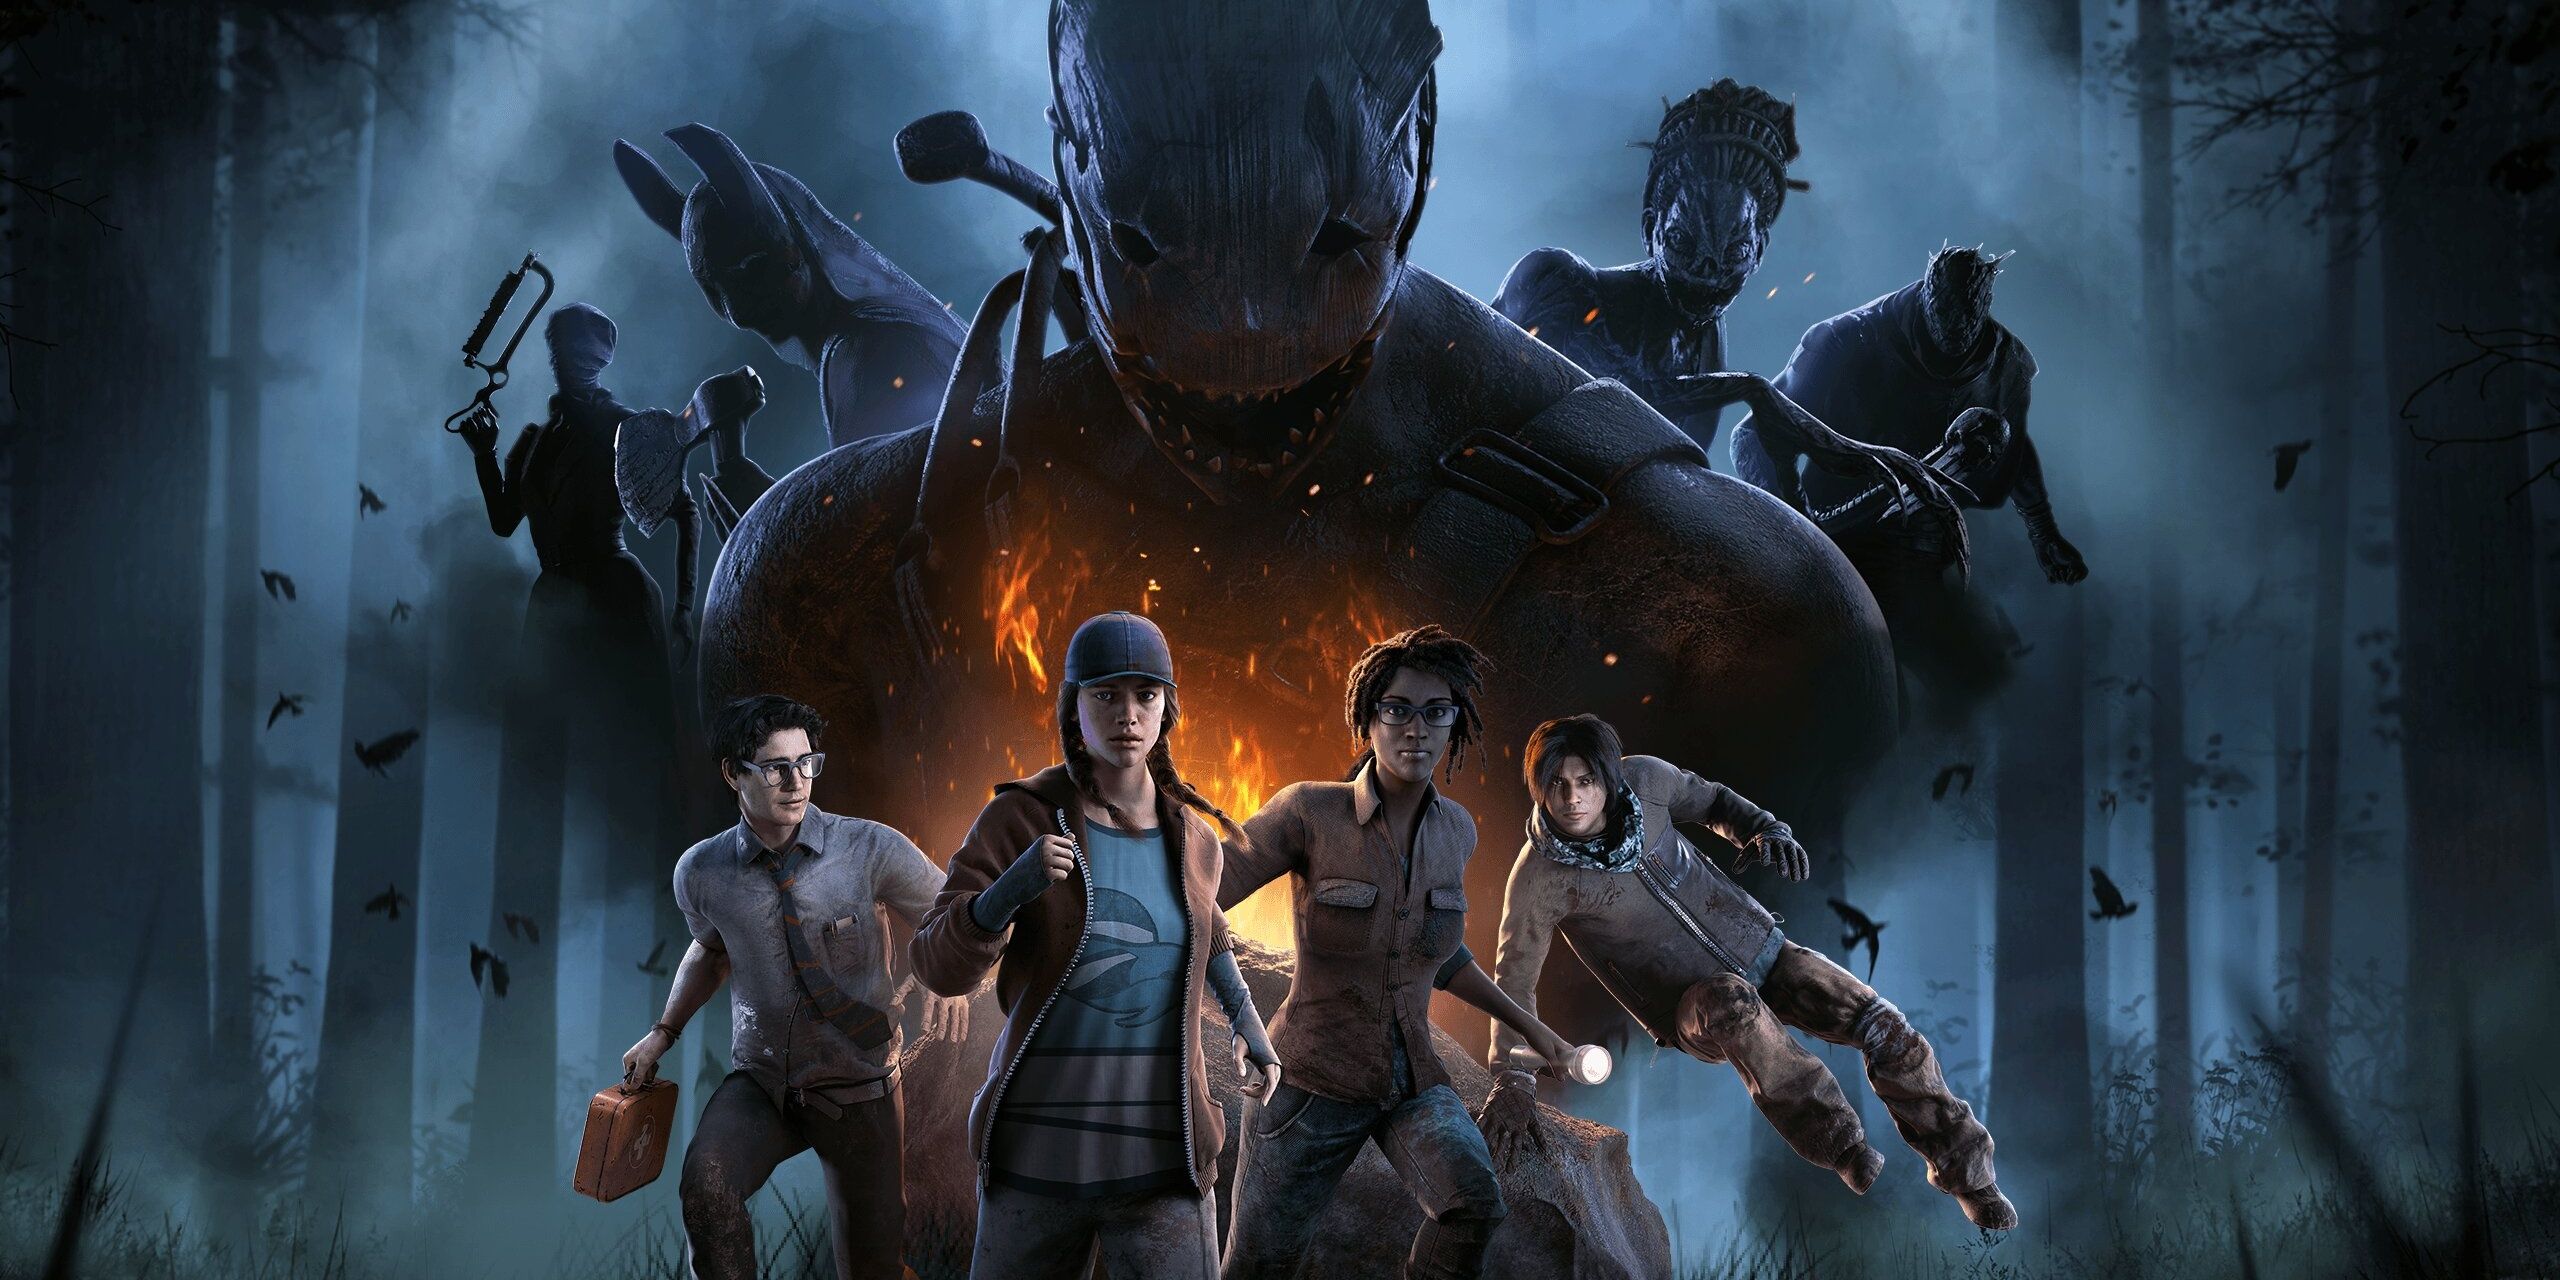 Cover art image for the Dead By Daylight video game